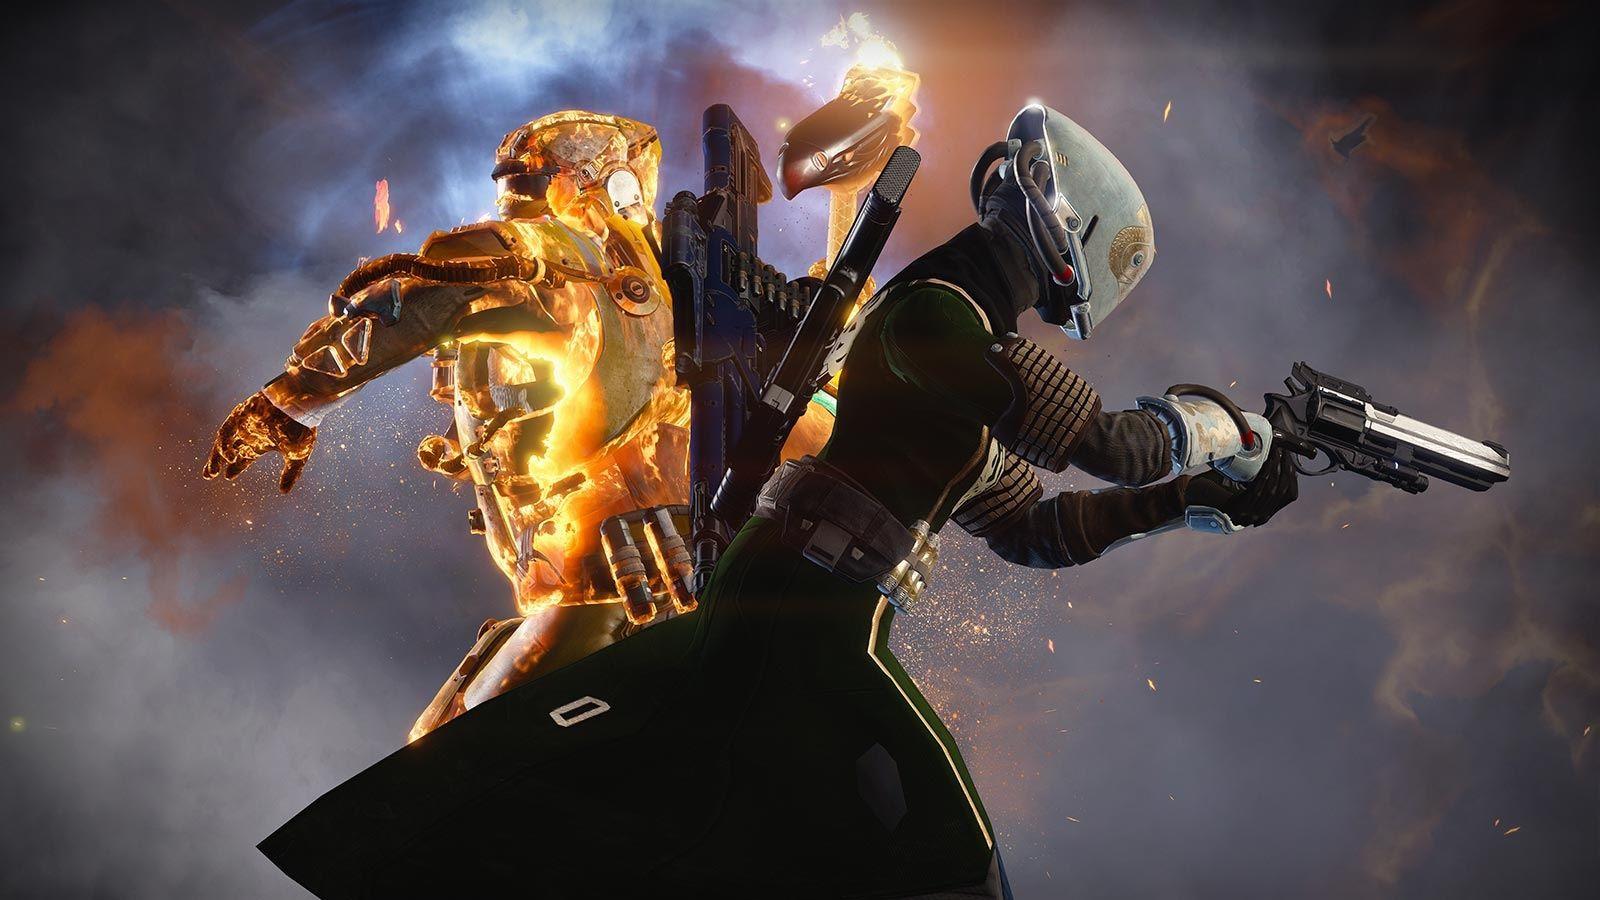 Take A Look At Destiny: The Taken King's PS Exclusive Armor Sets